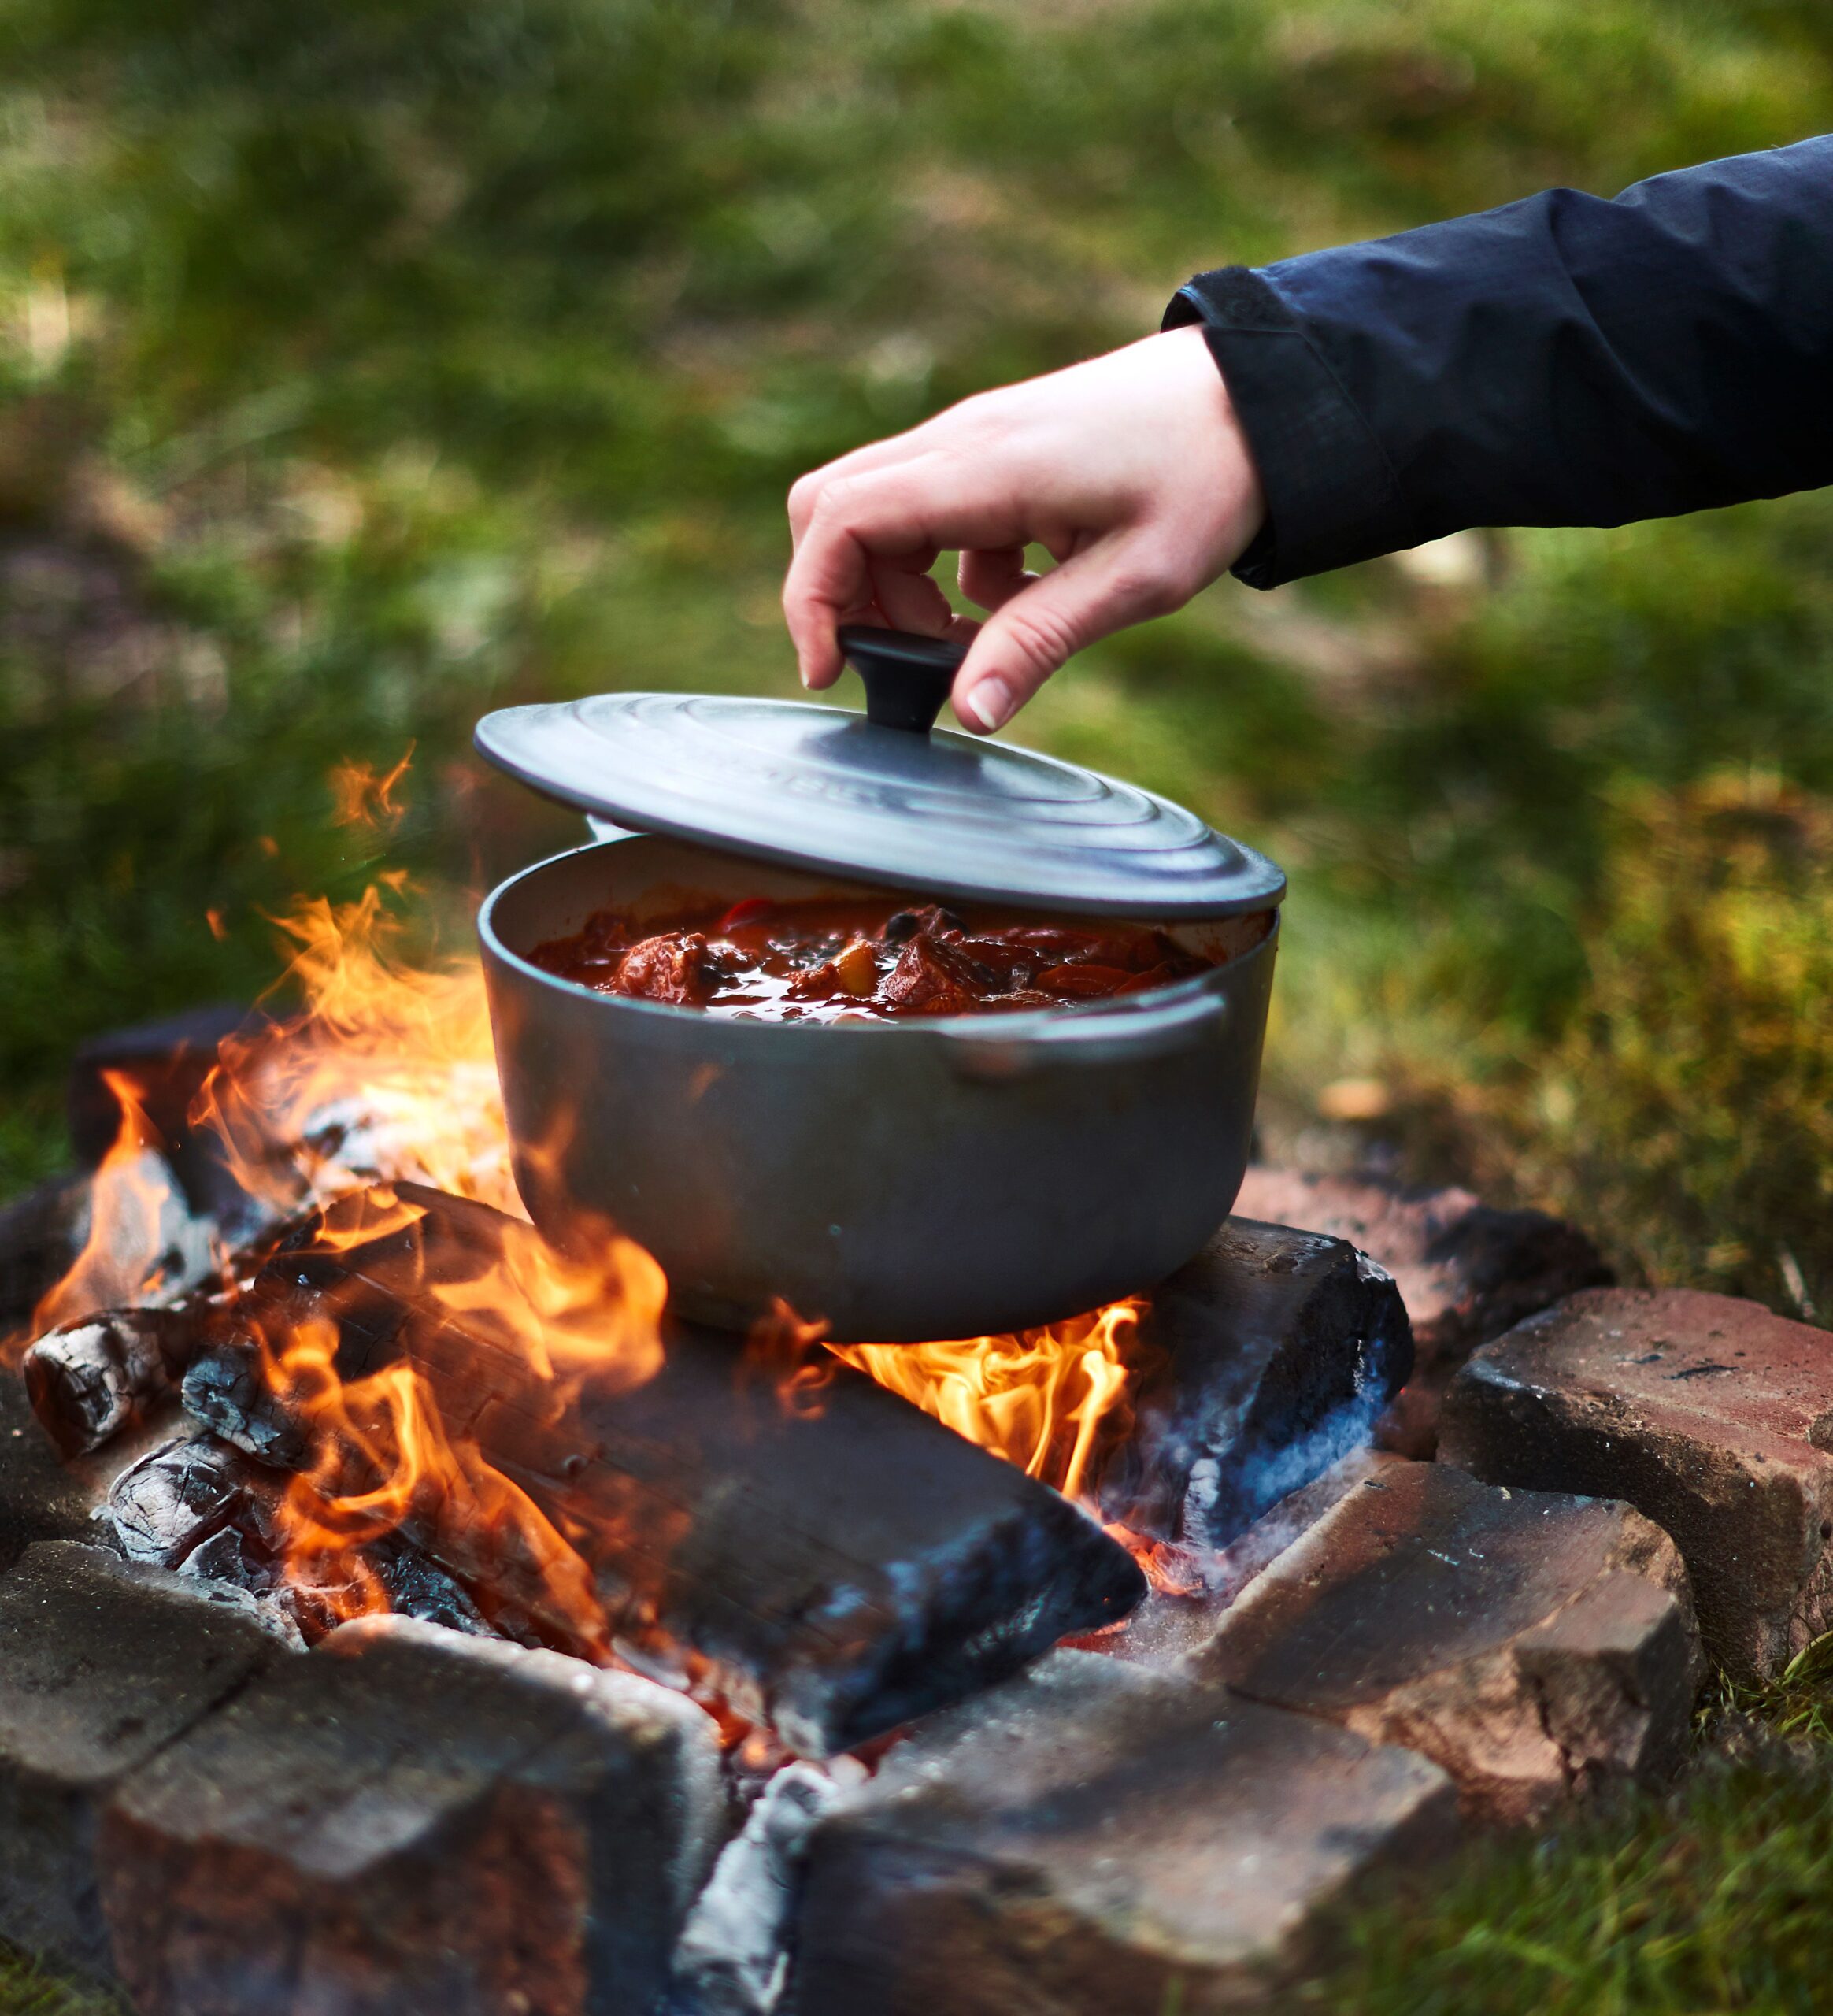 Cook over a Campfire. Camping food. The Wild Cooking. People Cooking over Fire.